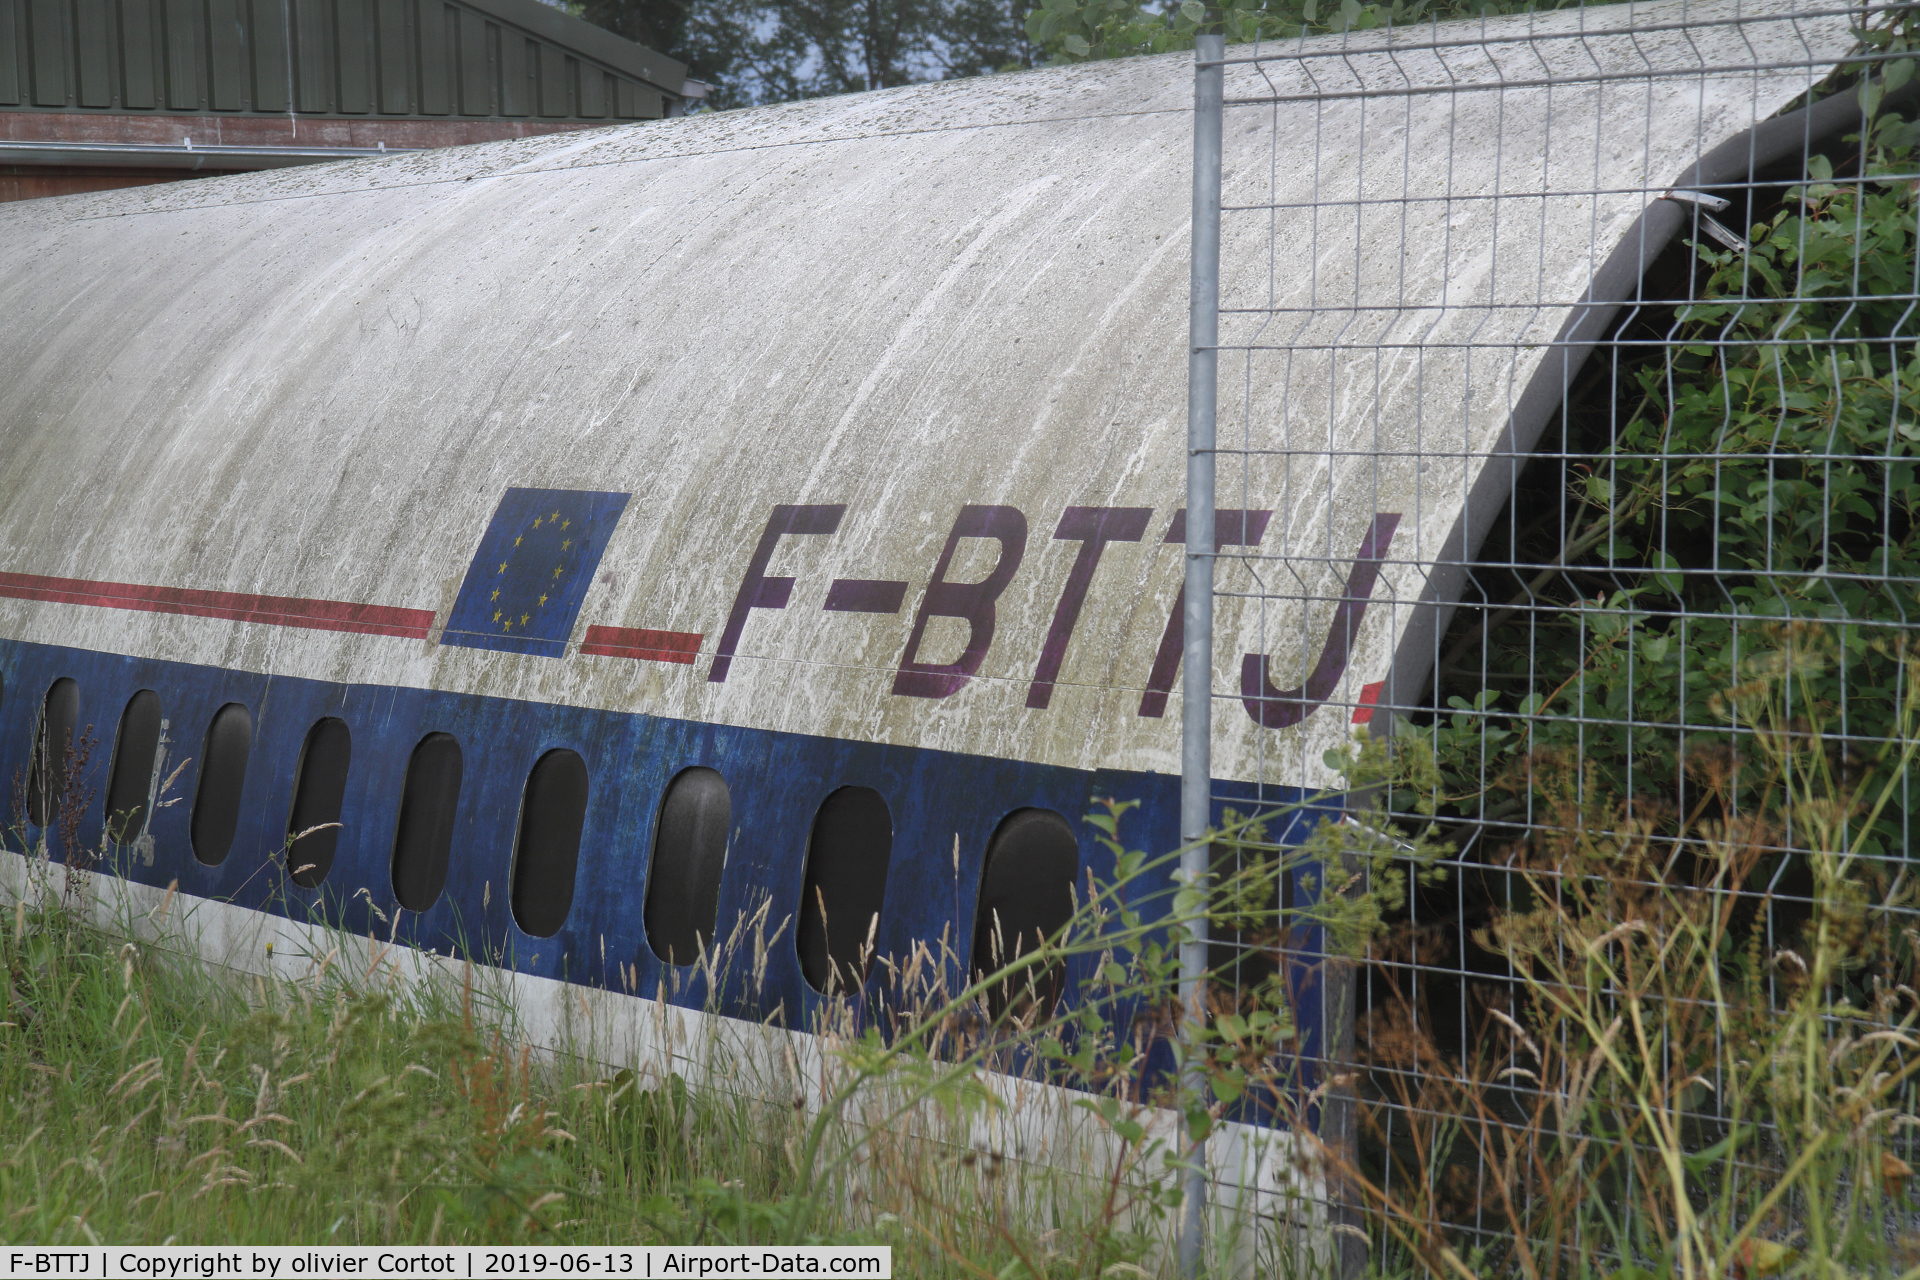 F-BTTJ, 1975 Dassault Mercure 100 C/N 10, A part of the fuselage is now a tunnel in a paintball park, near Volkel, NL